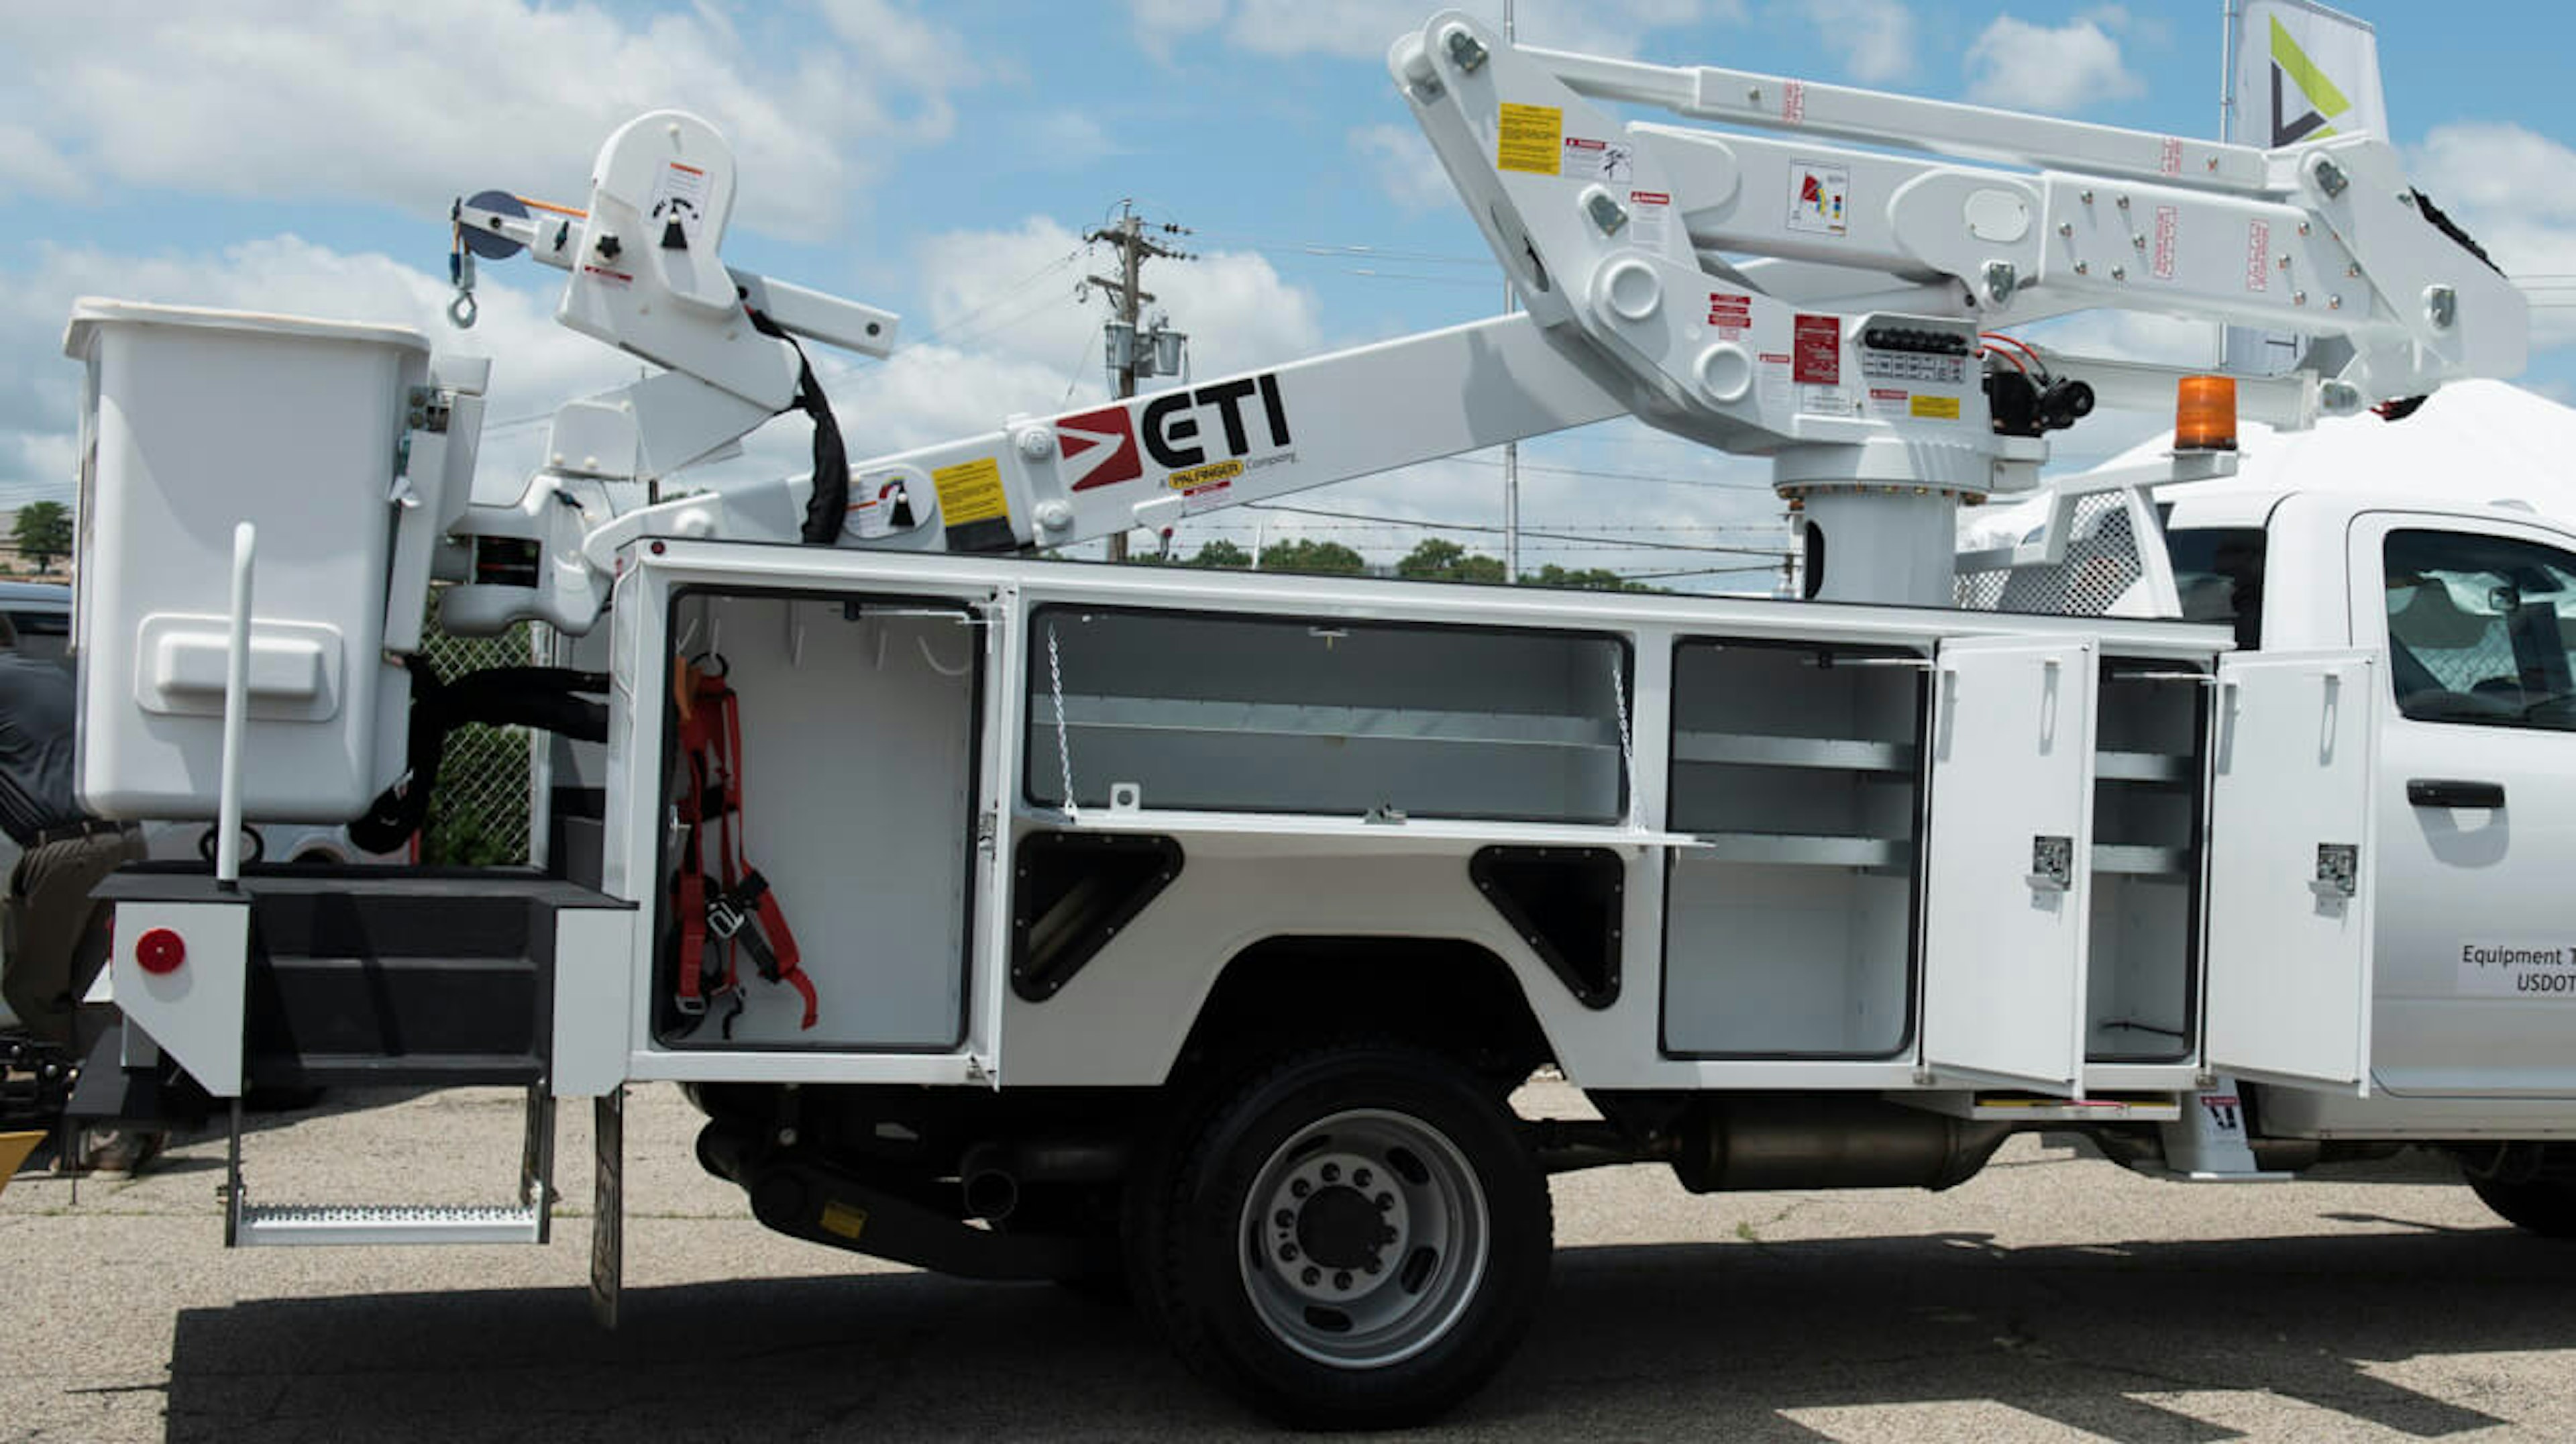 Bucket Lift on the top of a Service Truck for Telecommunications